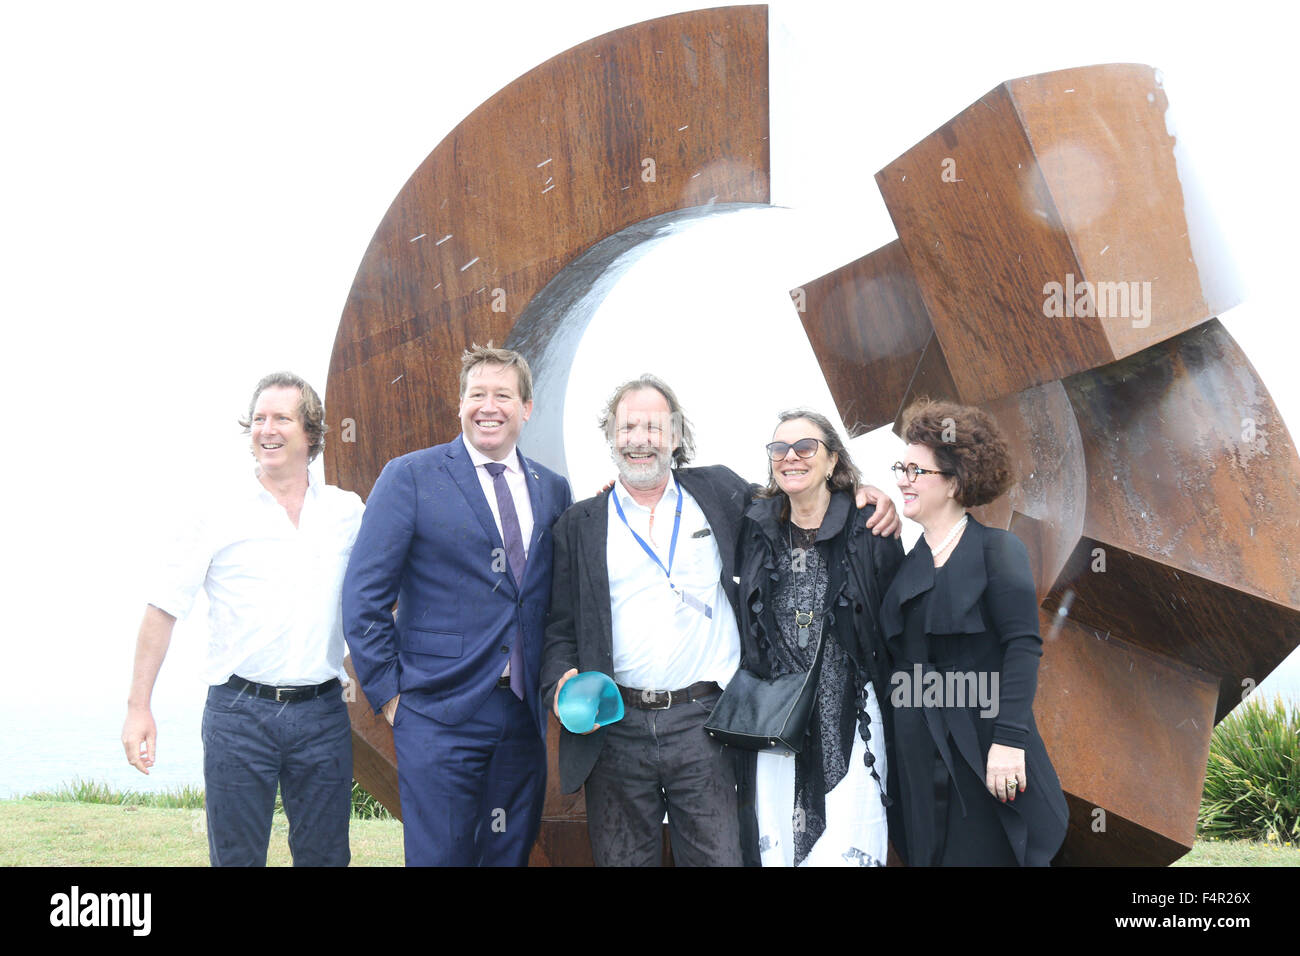 Sydney, Australia. 22 October 2015.  Pictured: Jorg Plickat (centre) from Germany next to his work ‘Divided Planet’ in the rain. He was announced as the winner of the $60,000 Macquarie Group Sculpture Prize. With, L-R: Founding Director David Handley, Troy Grant MP, Deputy Premier of New South Wales, his wife? An a representative from Macquarie Bank. 107 different sculptures can be seen at the 19th annual Sculpture by the Sea Bondi exhibition along the coastal walk between Bondi and Tamarama Beaches. Credit: Richard Milnes/Alamy Live News Stock Photo